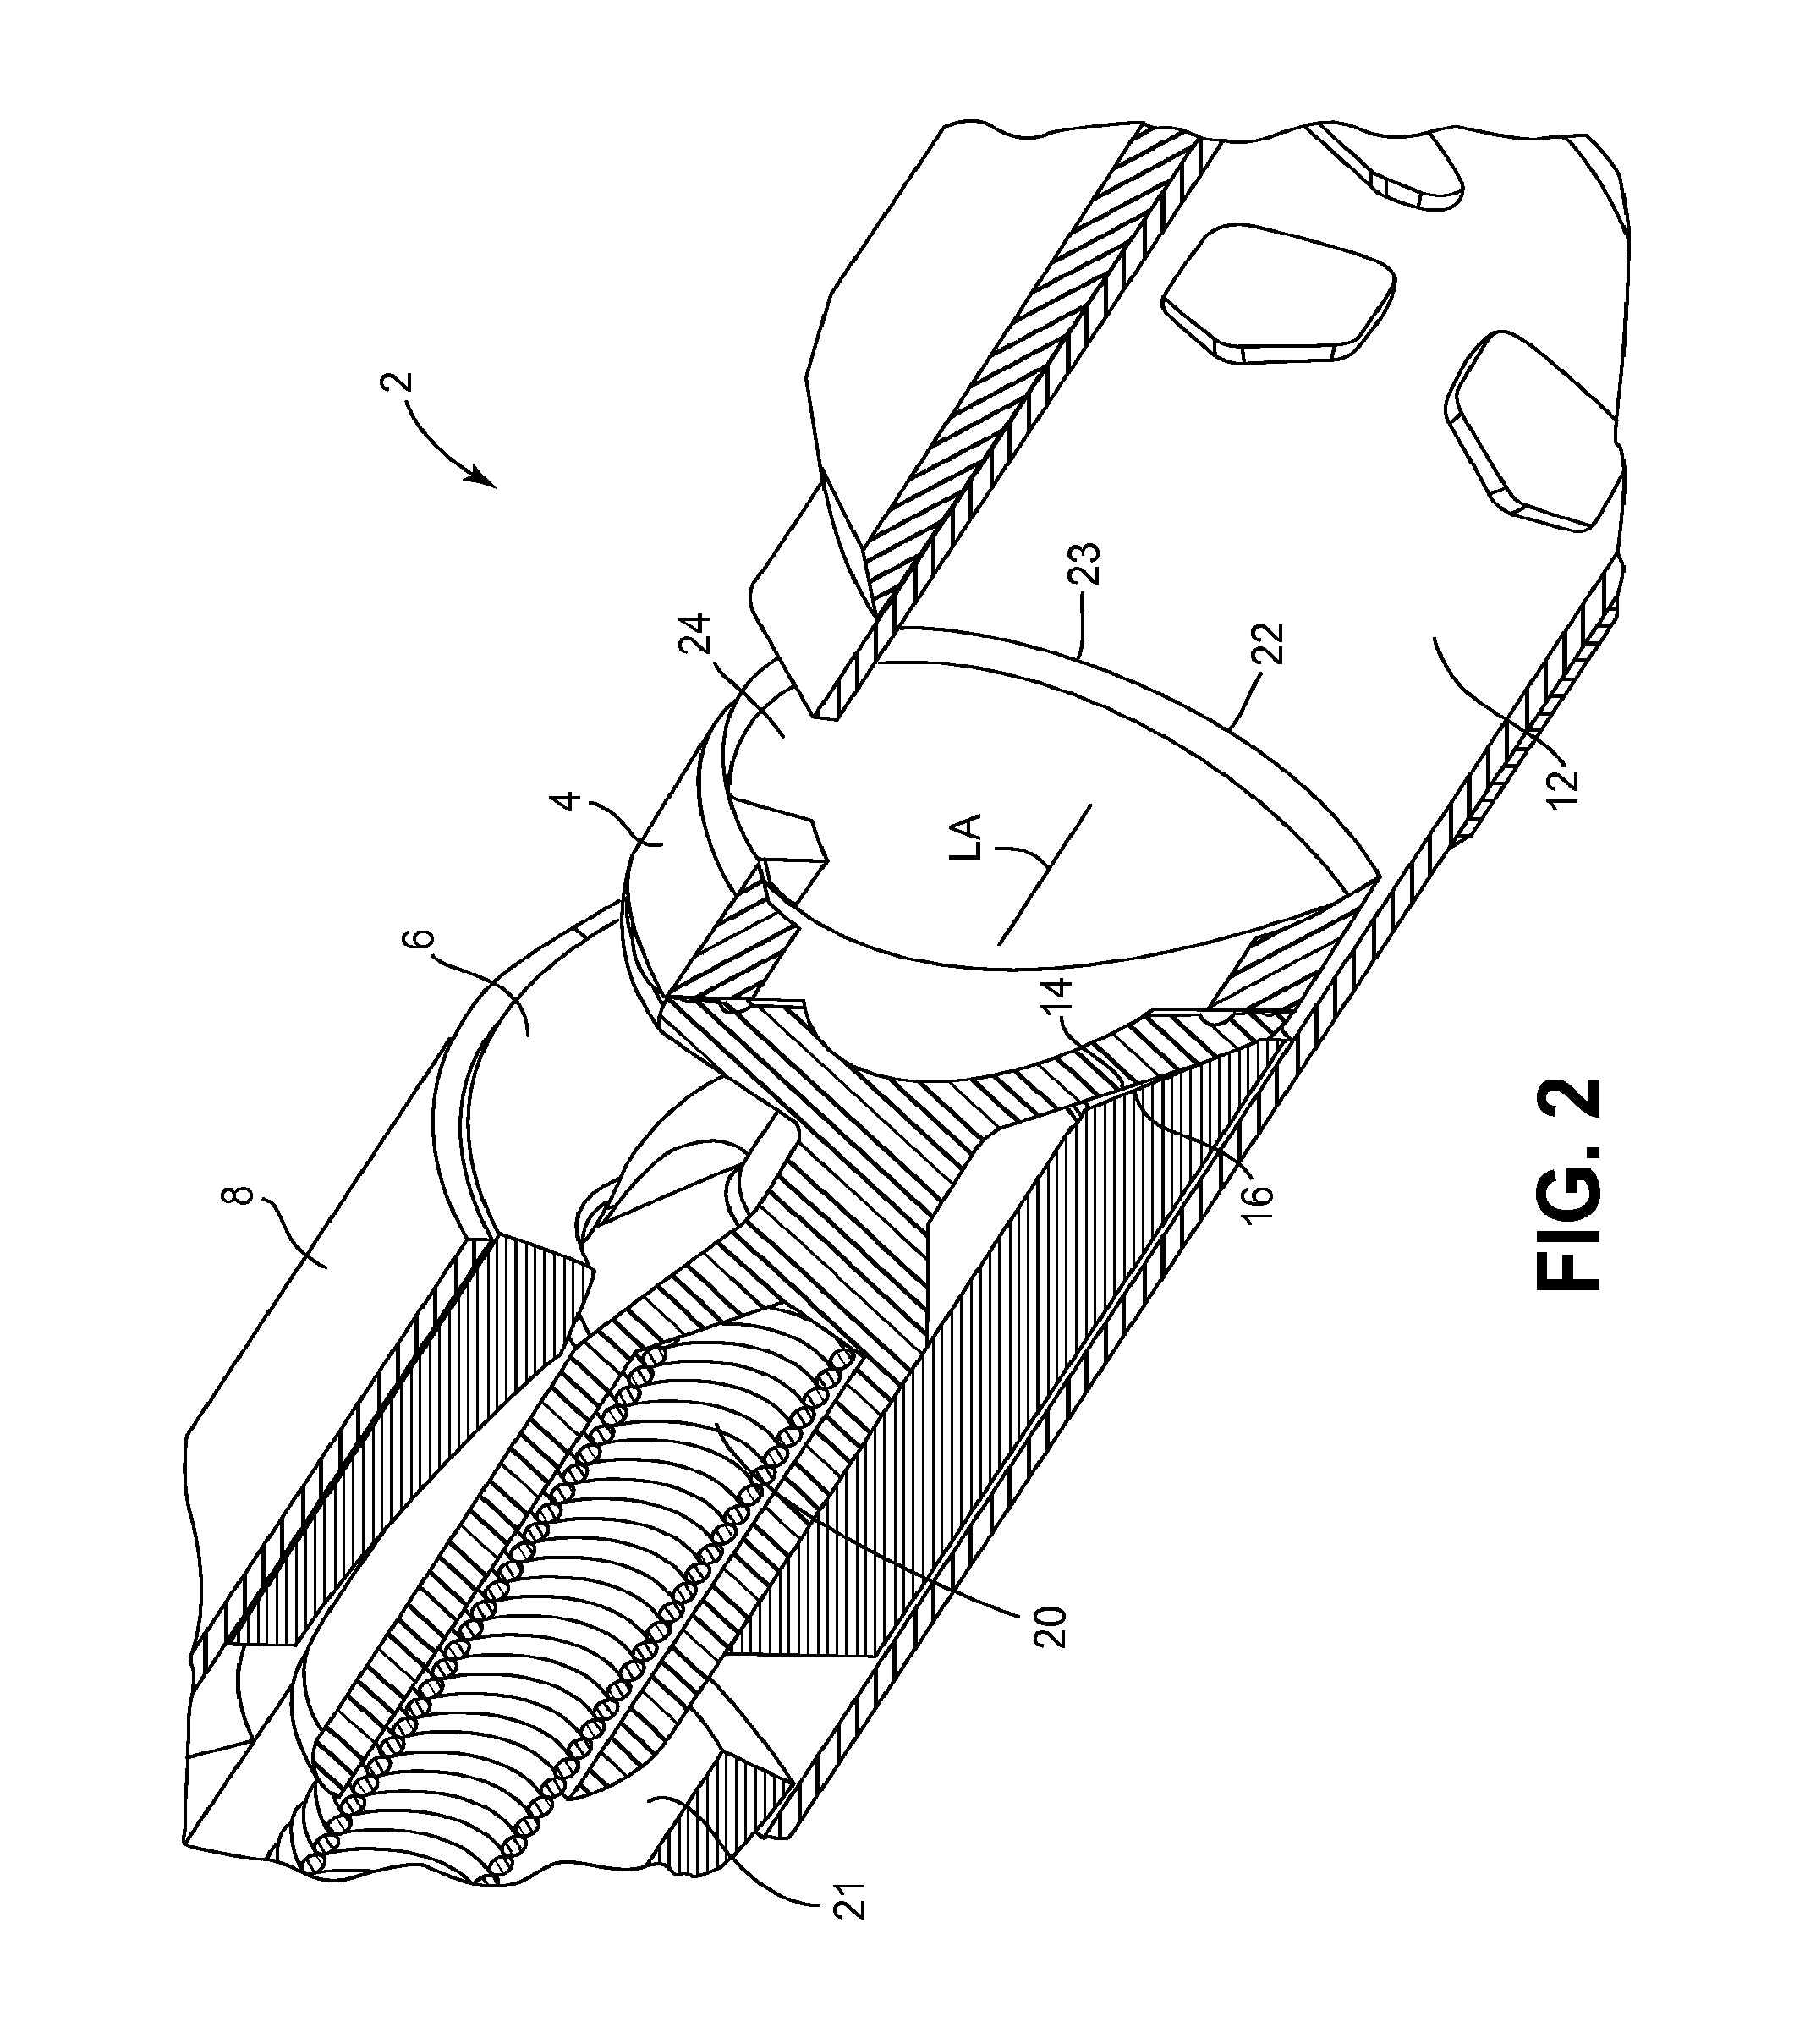 Easily cleaned atherectomy catheters and methods of use